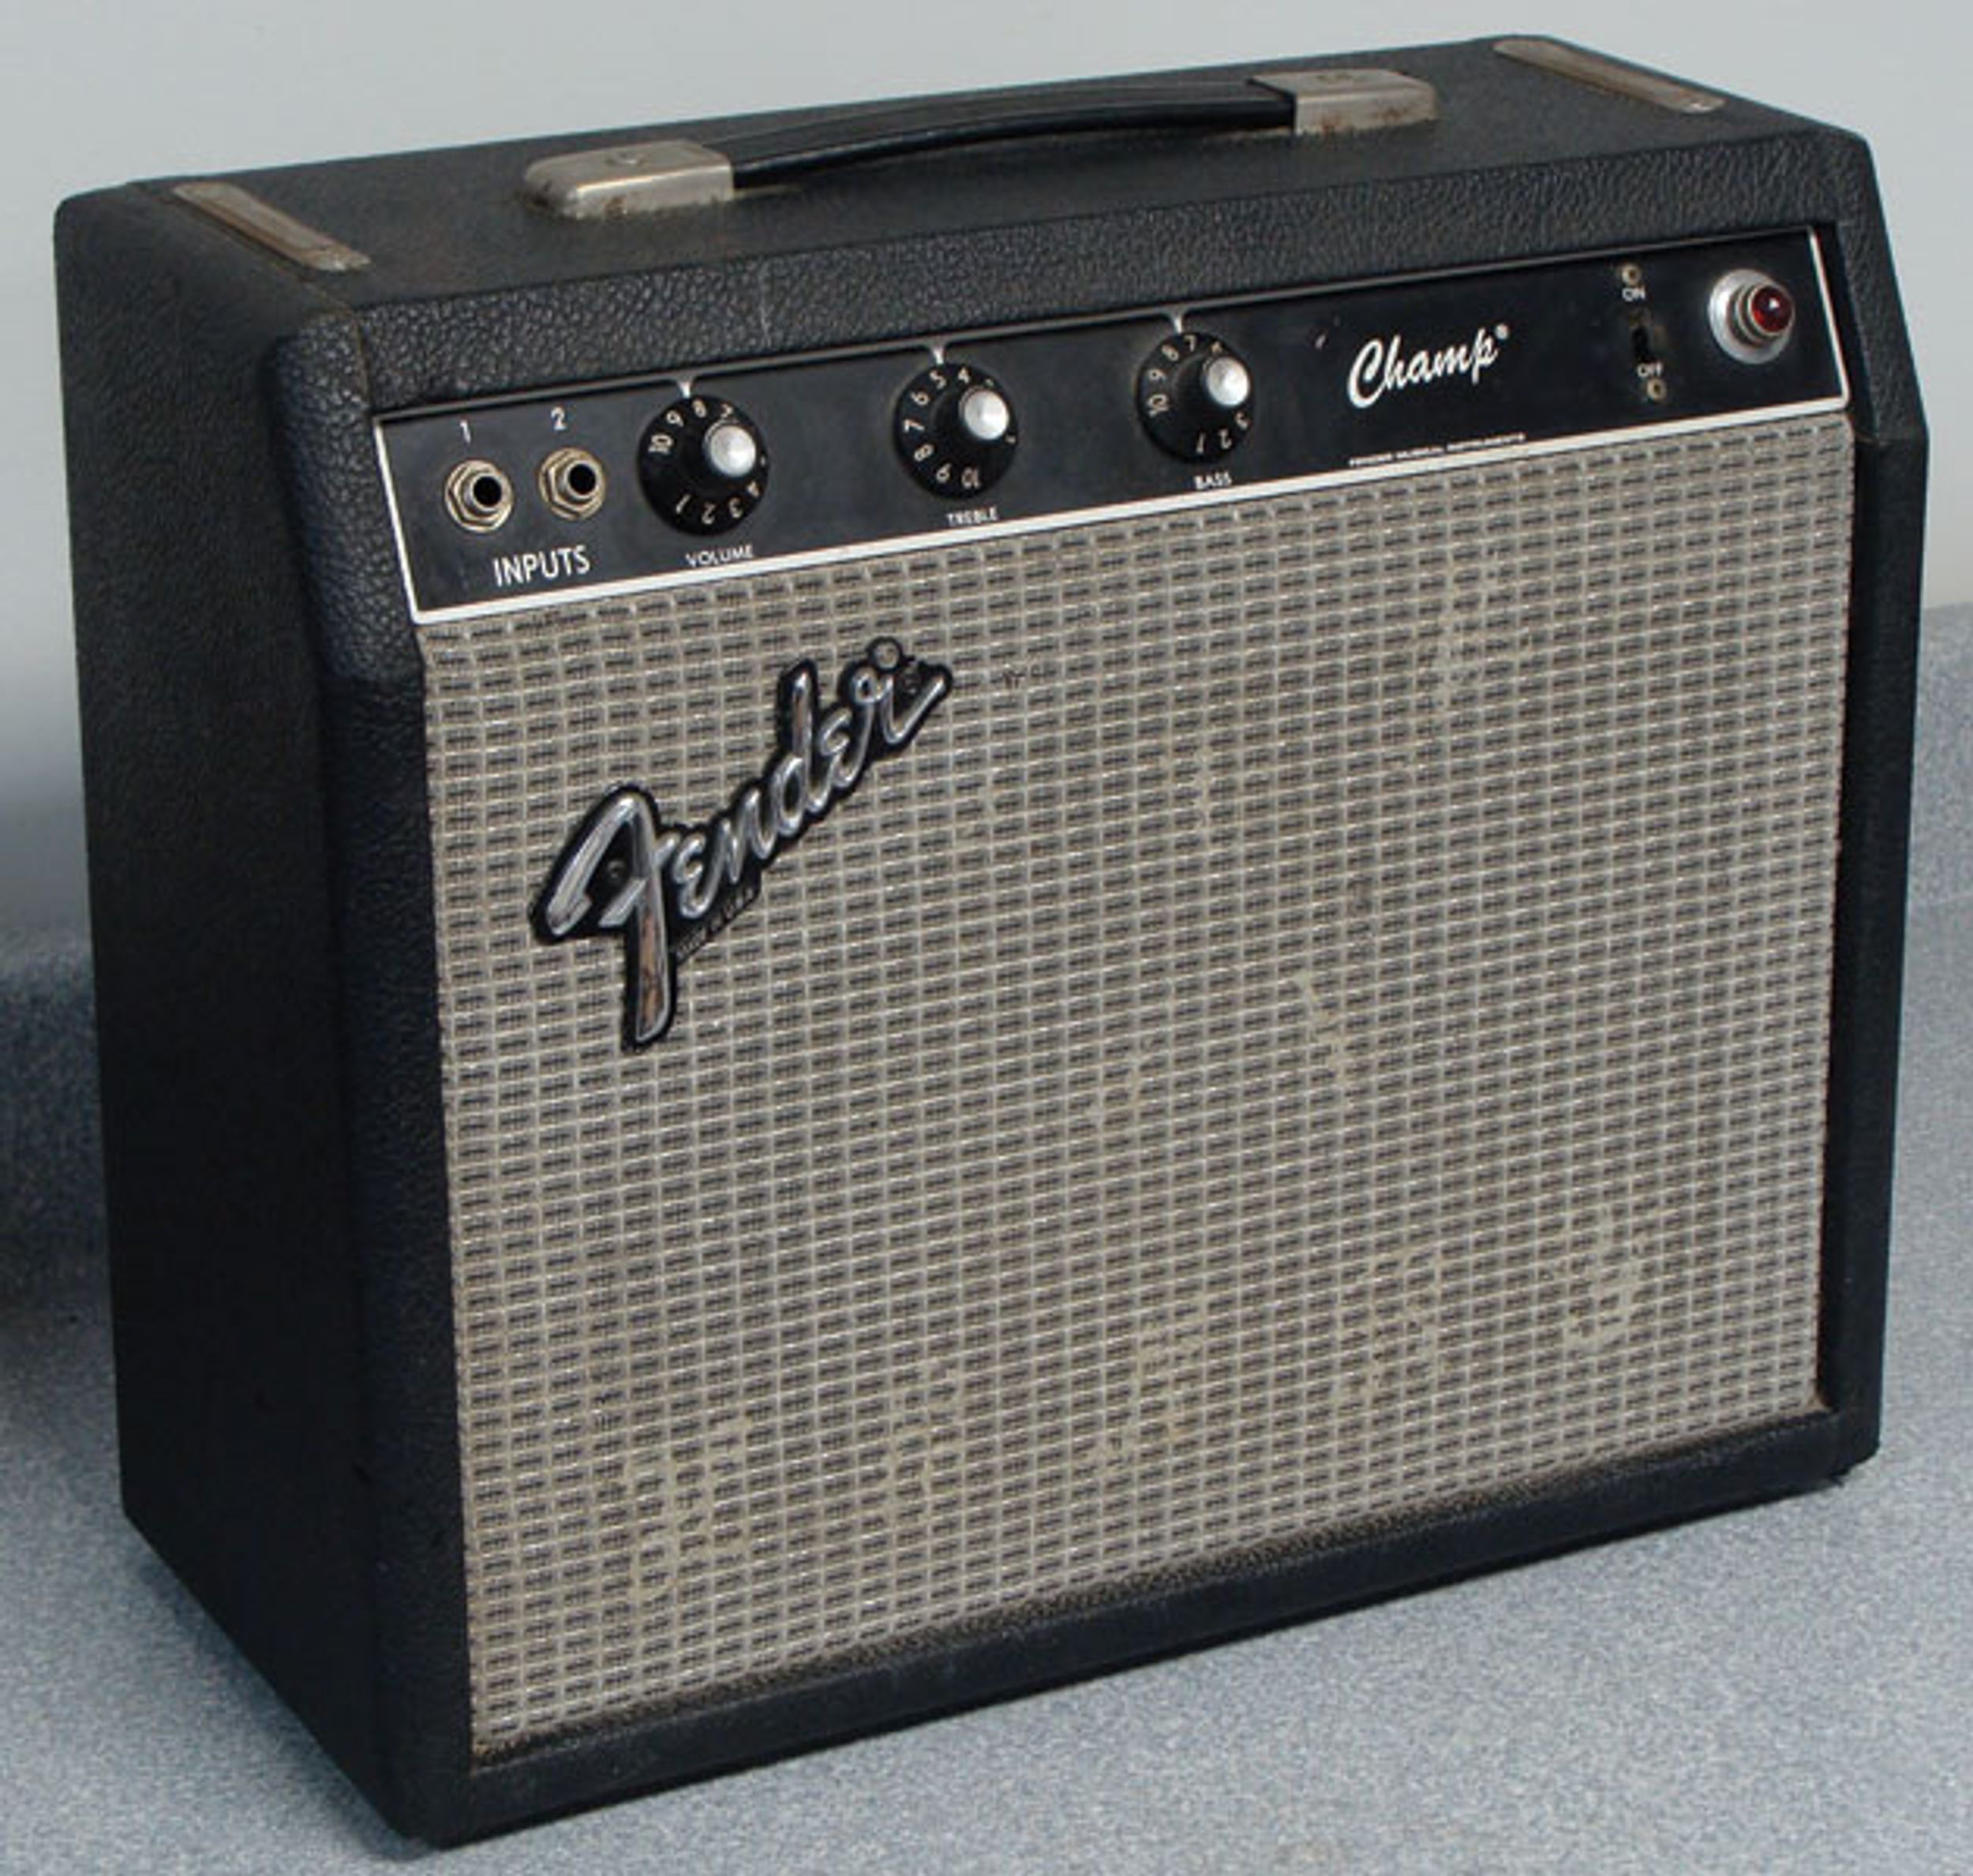 Ask Amp Man: Pumping Up an ’80s Fender Champ